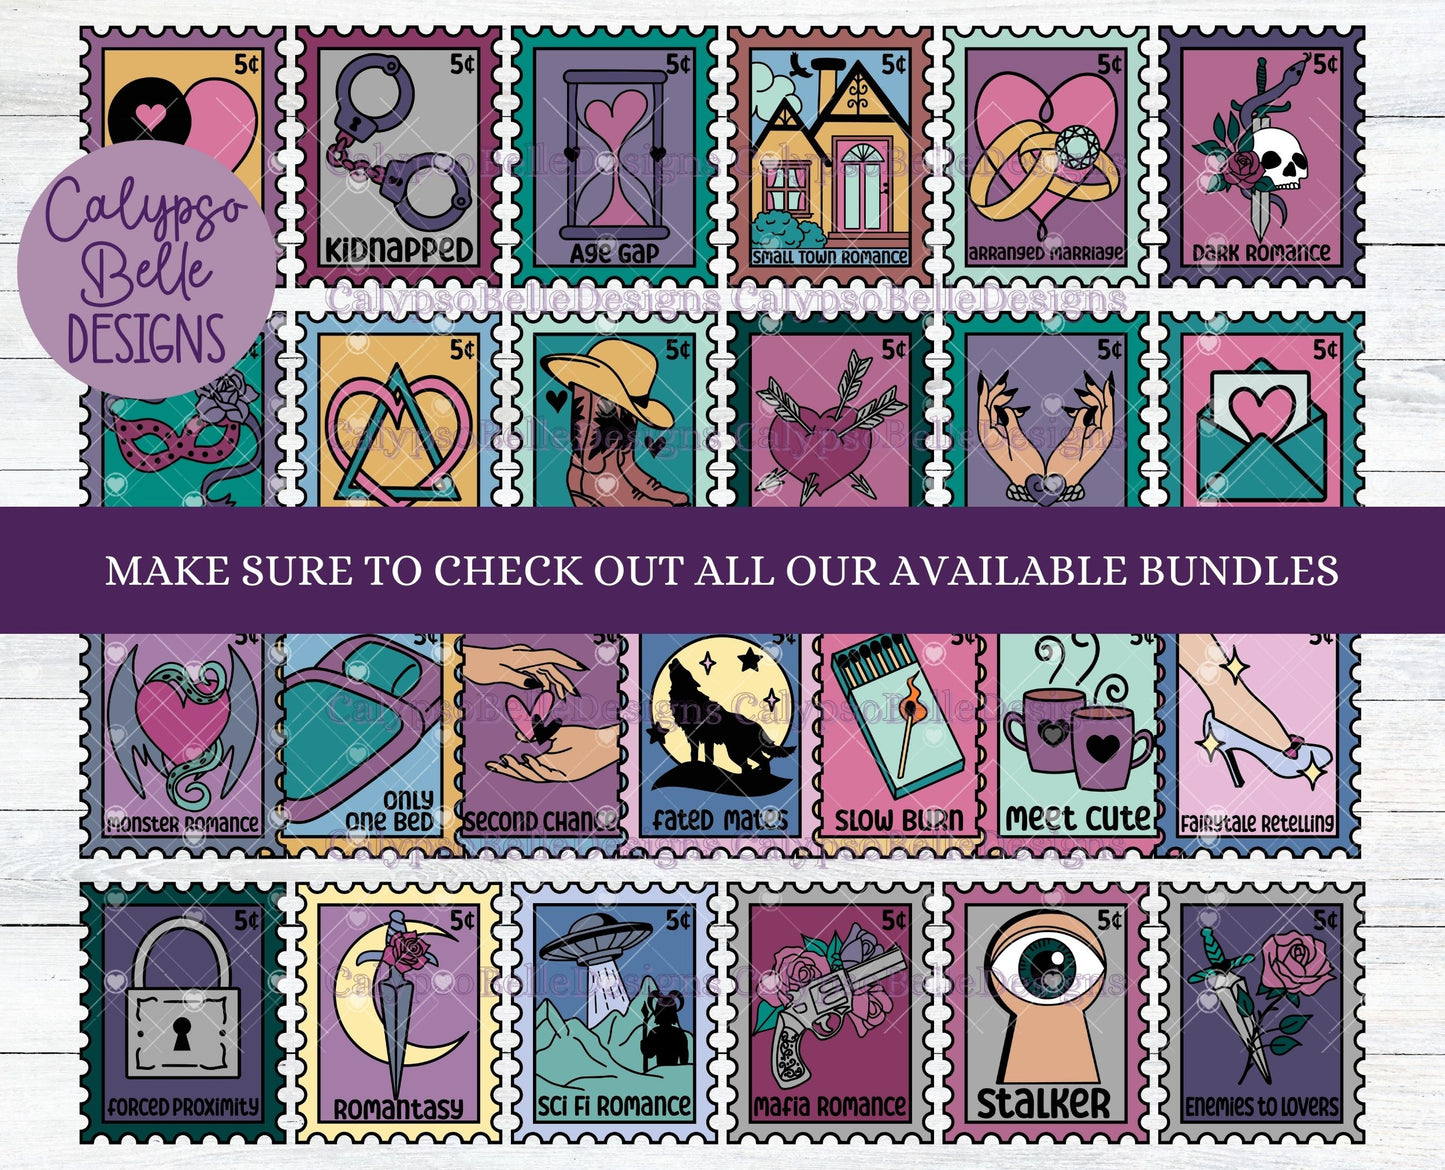 Urban Fantasy Romance, Trope Stamps, Bookish Stamps, Bookish Design